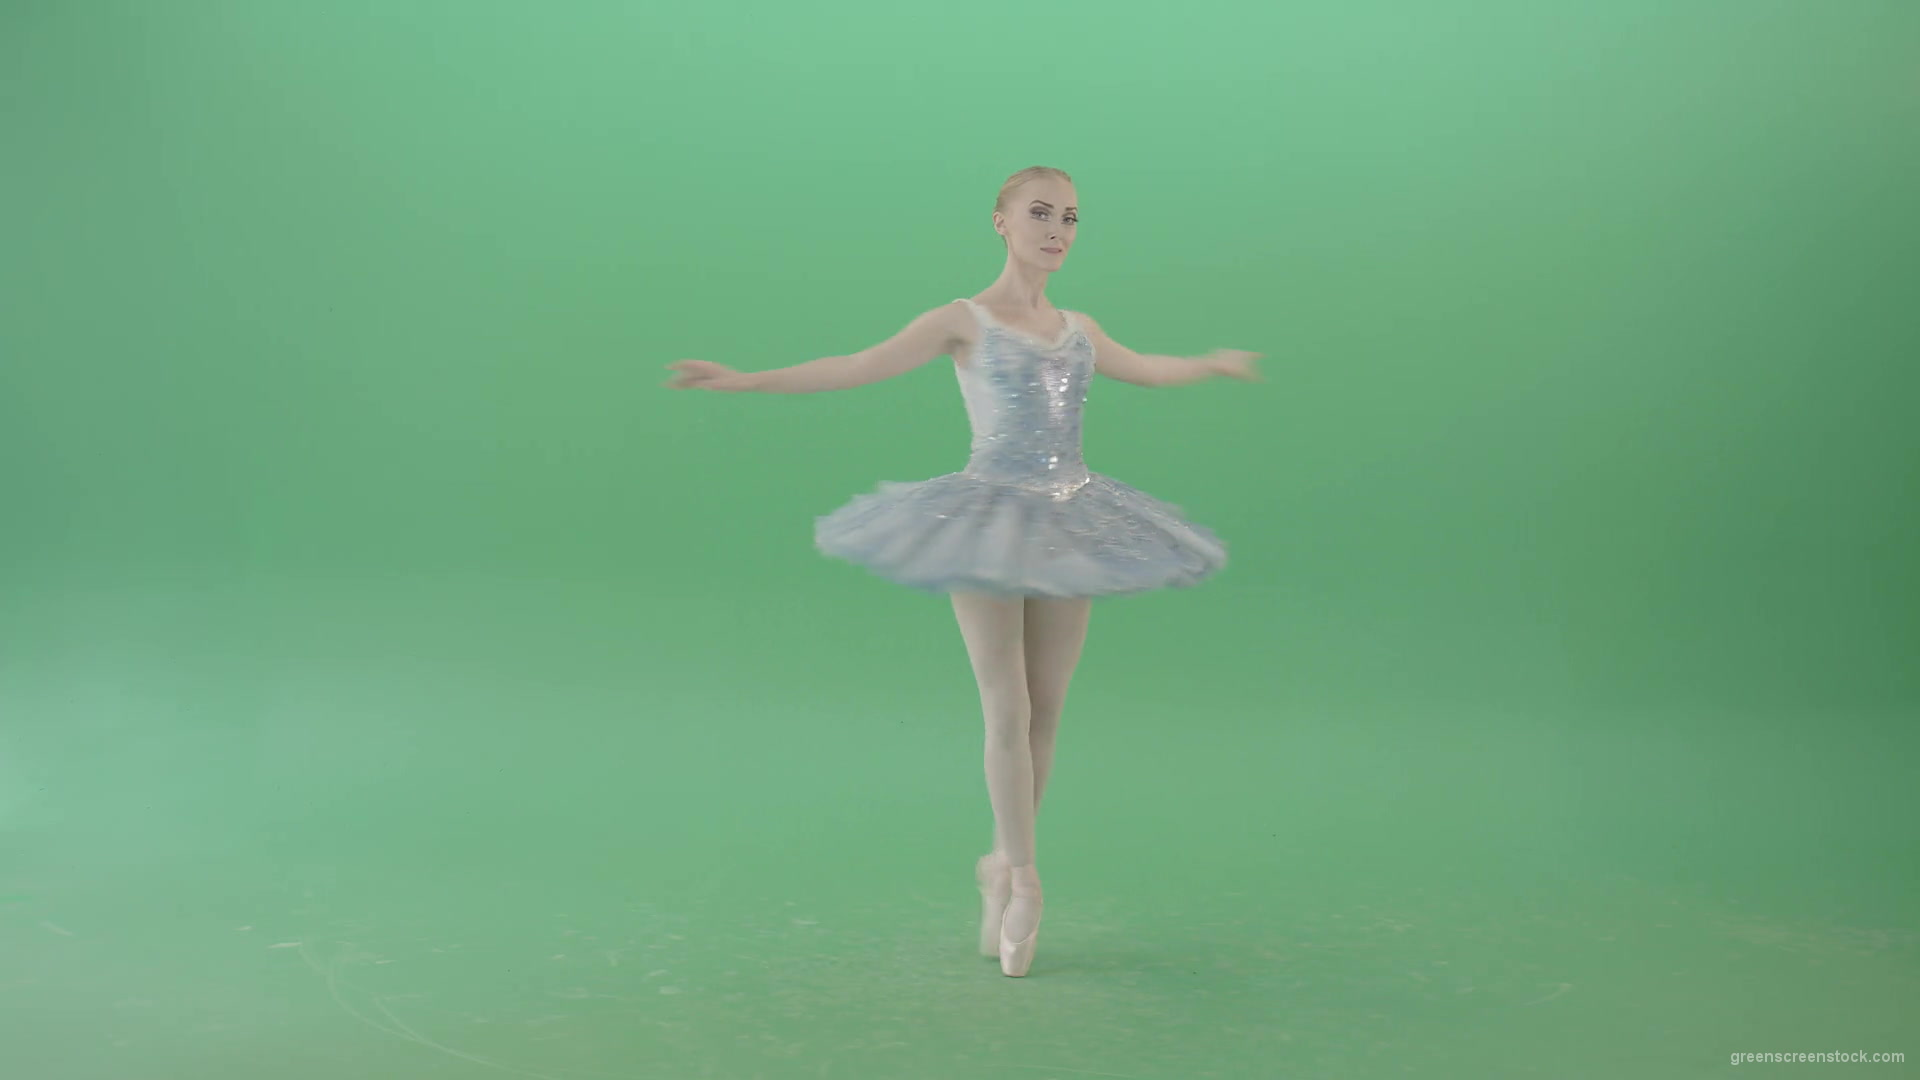 Beauty-blonde-girl-with-happy-smile-spinning-in-ballet-dress-over-green-screen-4K-Video-Footage-1920_004 Green Screen Stock